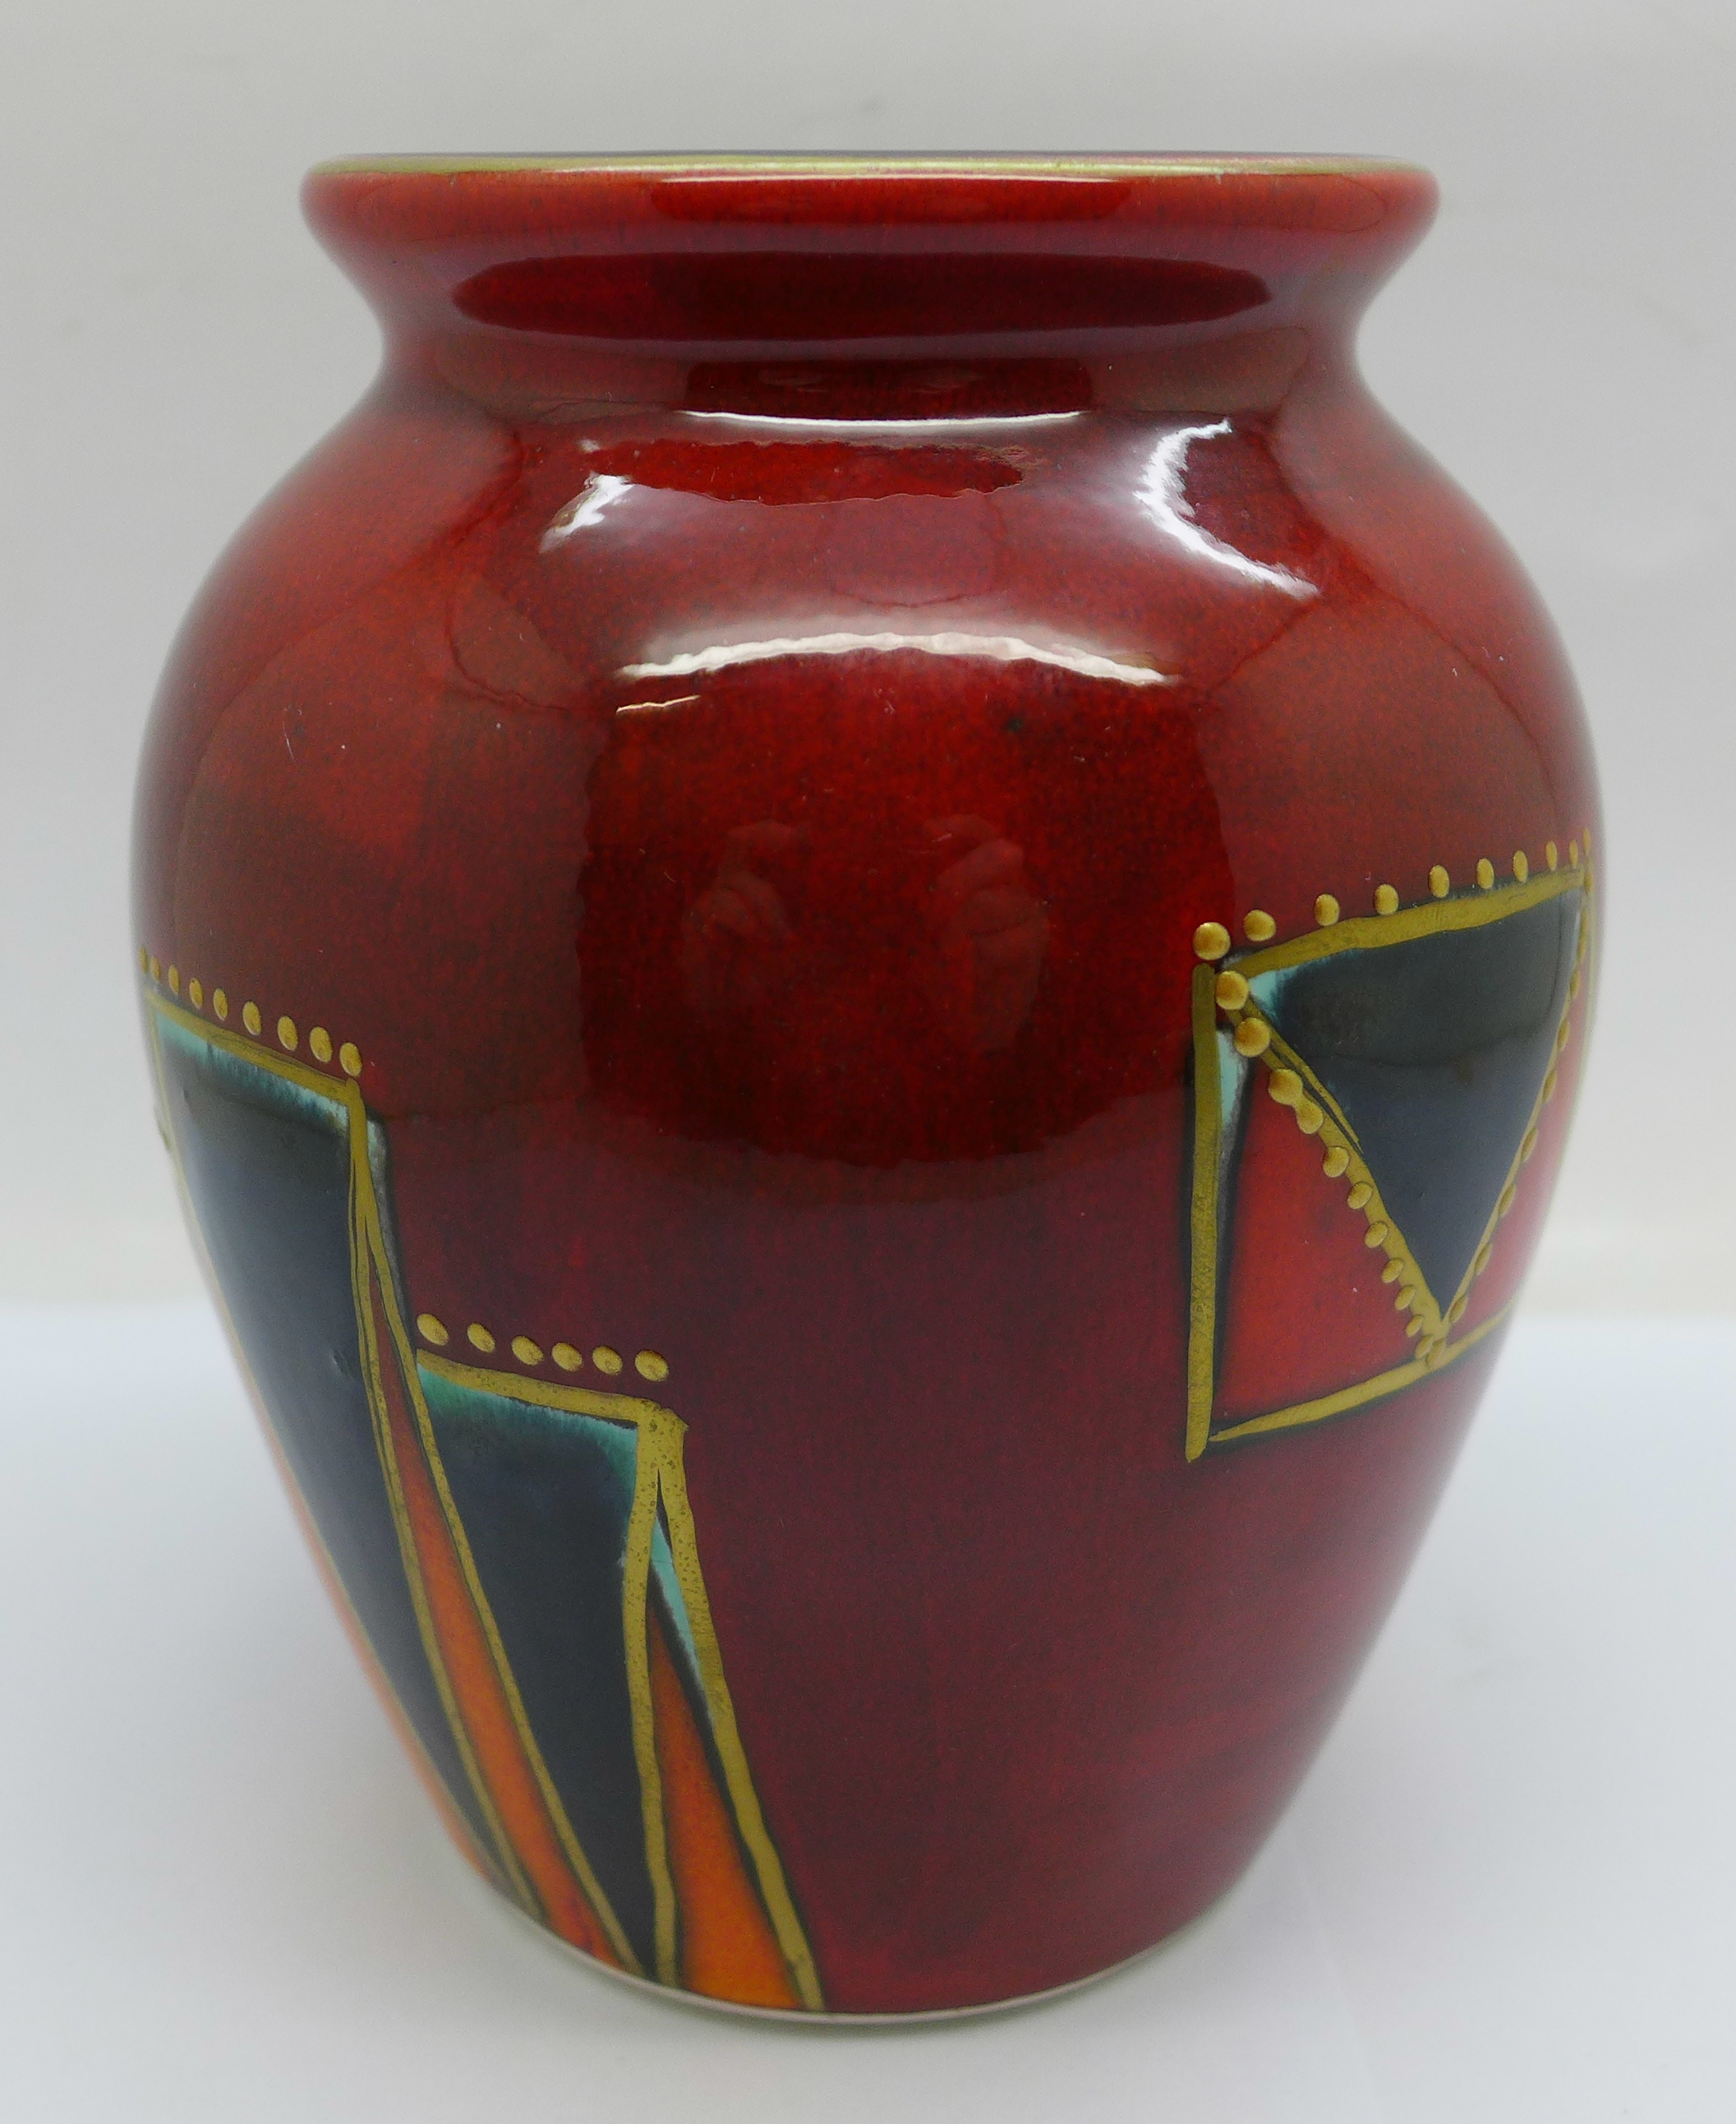 An Anita Harris art pottery vase, hand painted Ali Baba shape in the Deco design, signed by Anita - Image 5 of 8